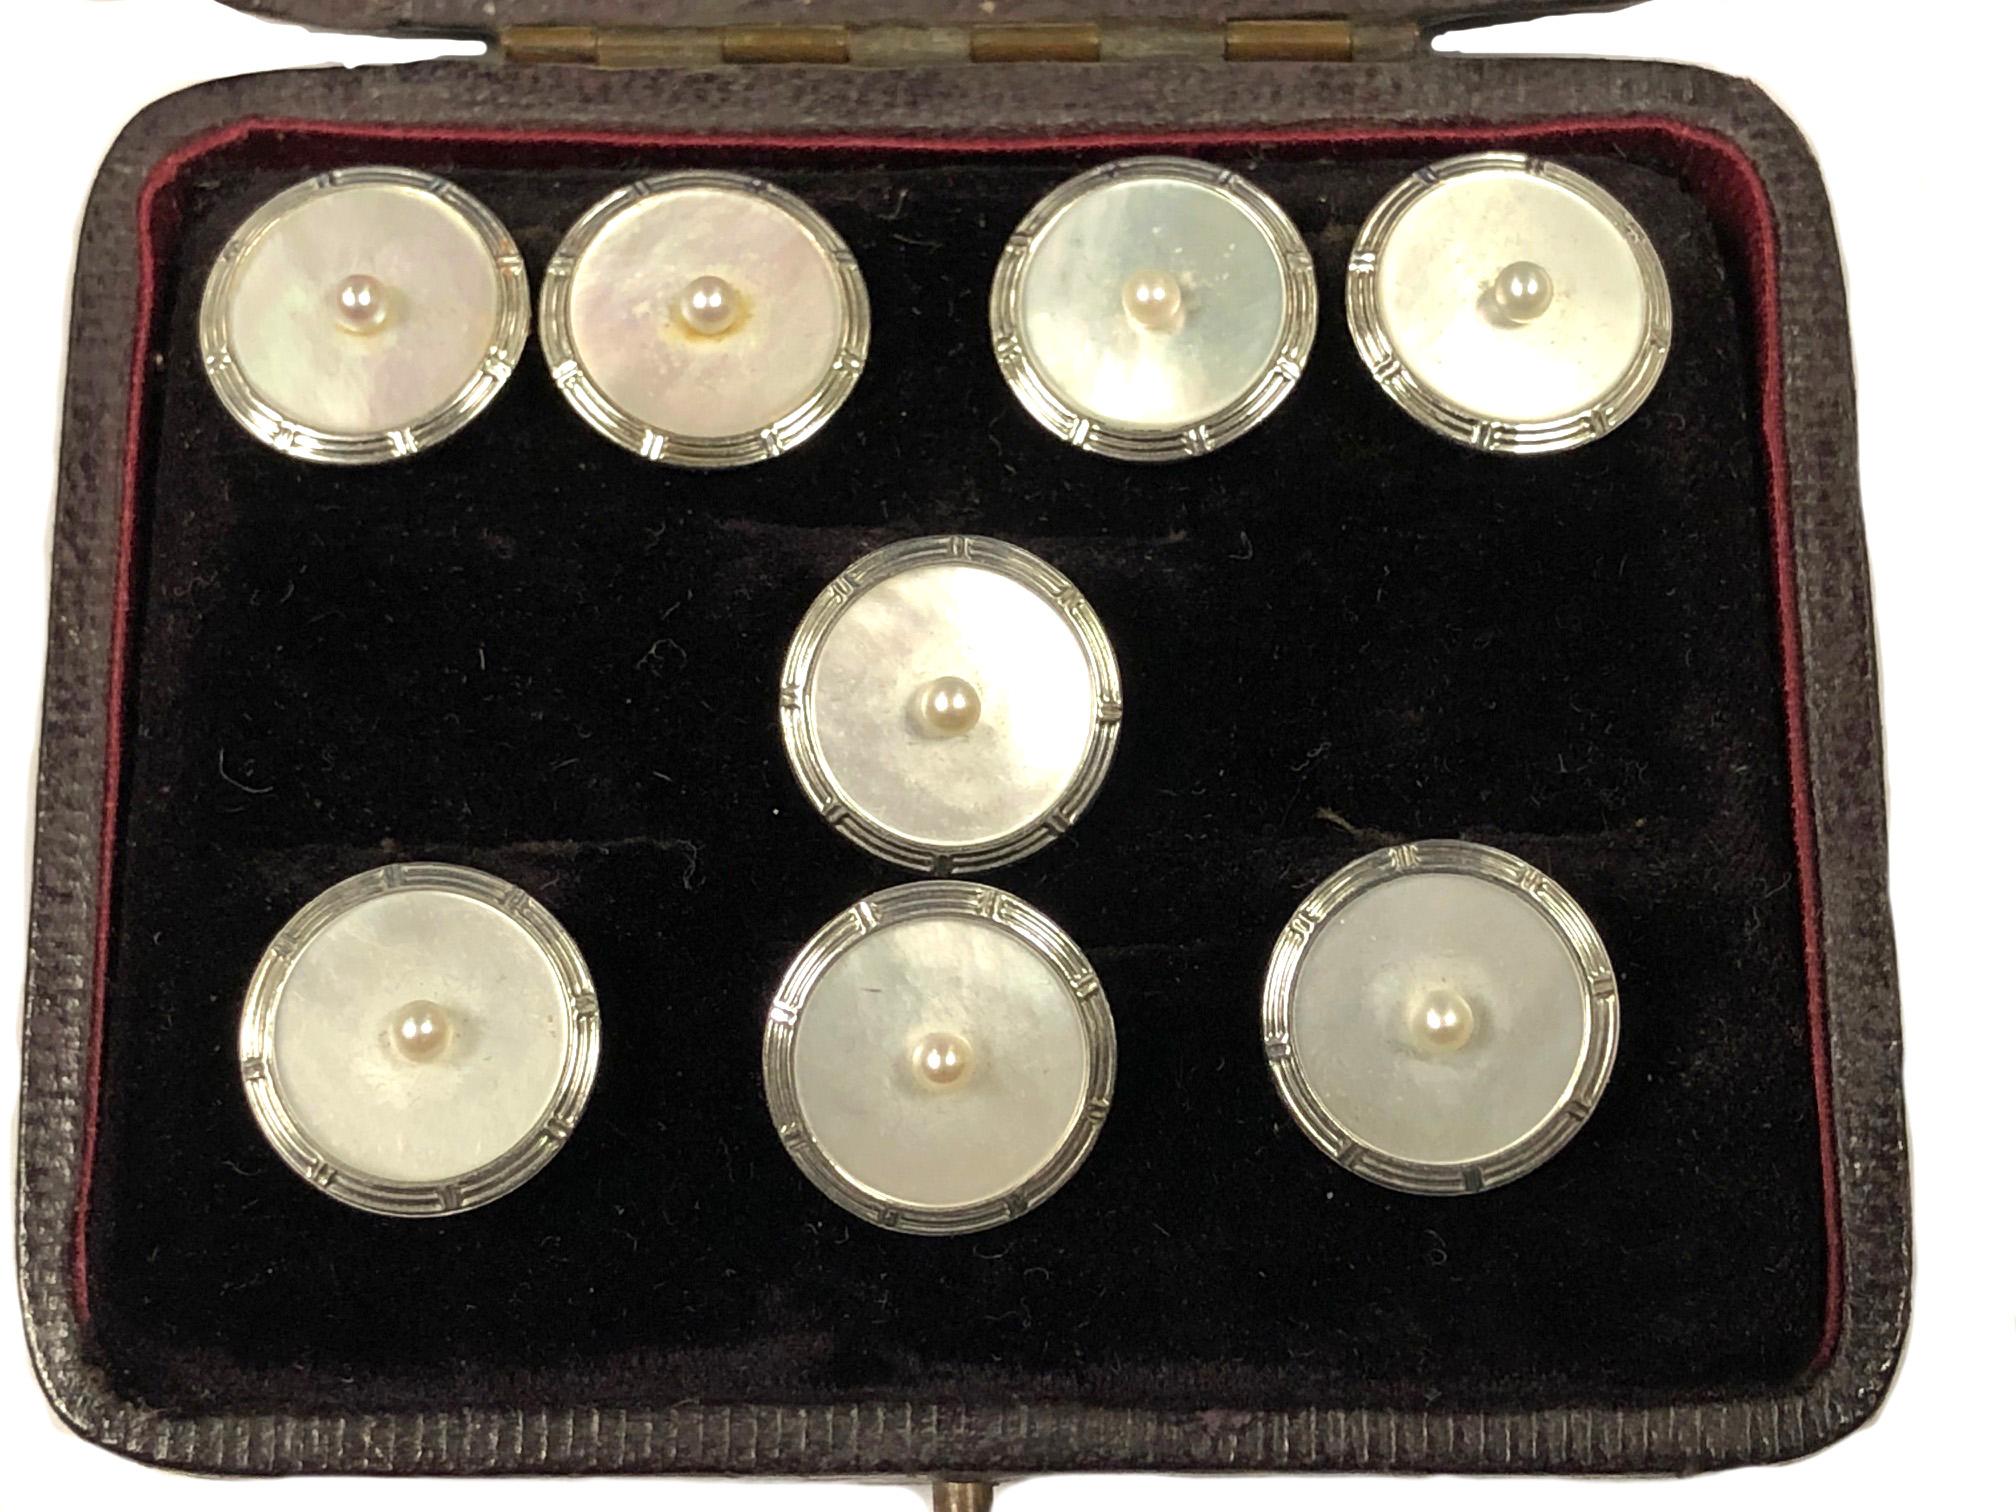 Circa 1930 14K White and Yellow Gold Tuxedo Dress Set comprising of a pair of Cufflinks and 4 shirt studs, set with a 2 MM Pearl atop White Mother of Pearl, measuring 1/2 inch in diameter. This set is in excellent, seldom worn condition and comes in